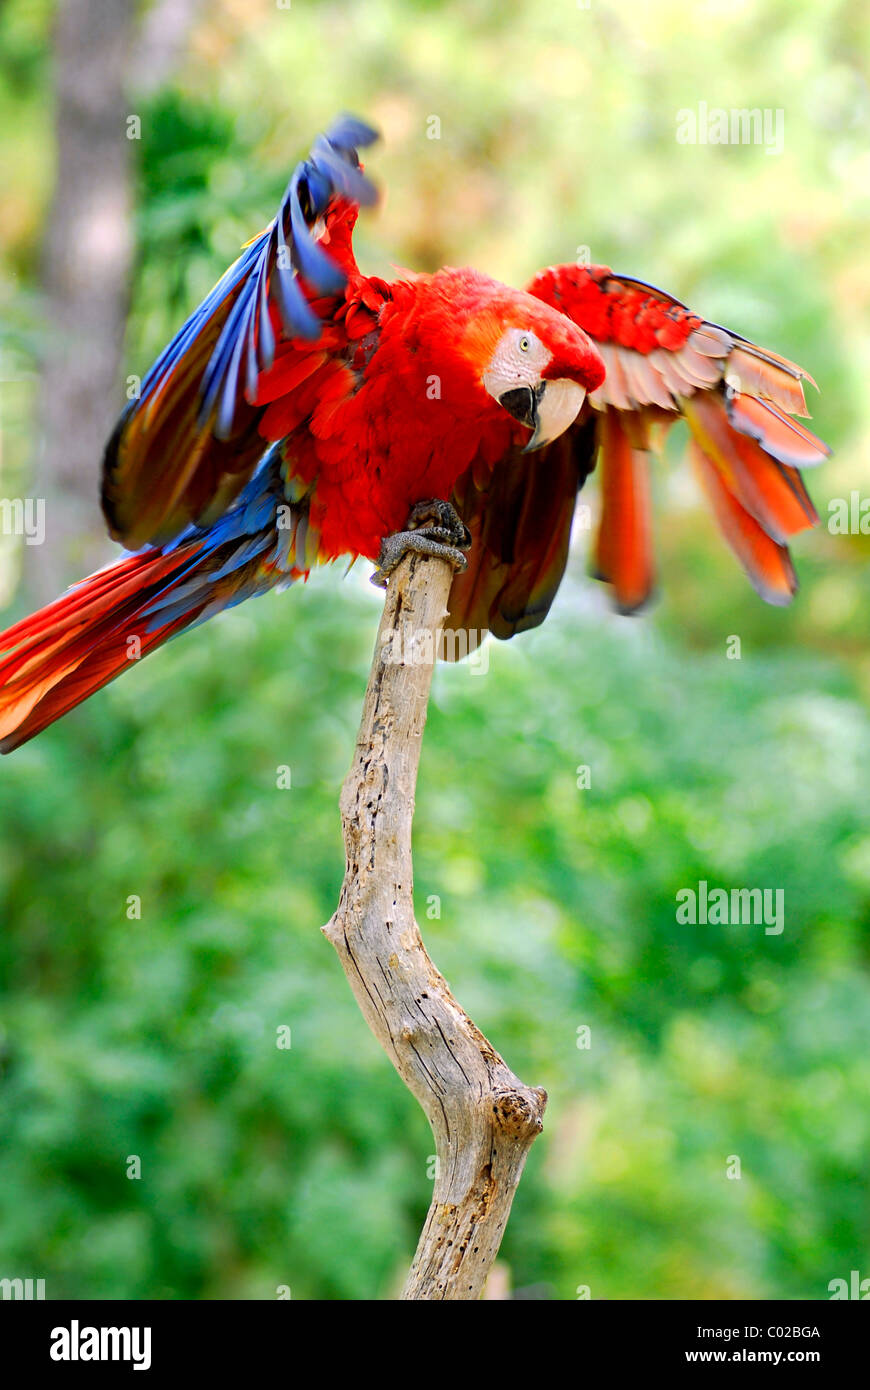 Closeup Scarlet Macaw (Ara macao) on wood perch outspread wings Stock Photo